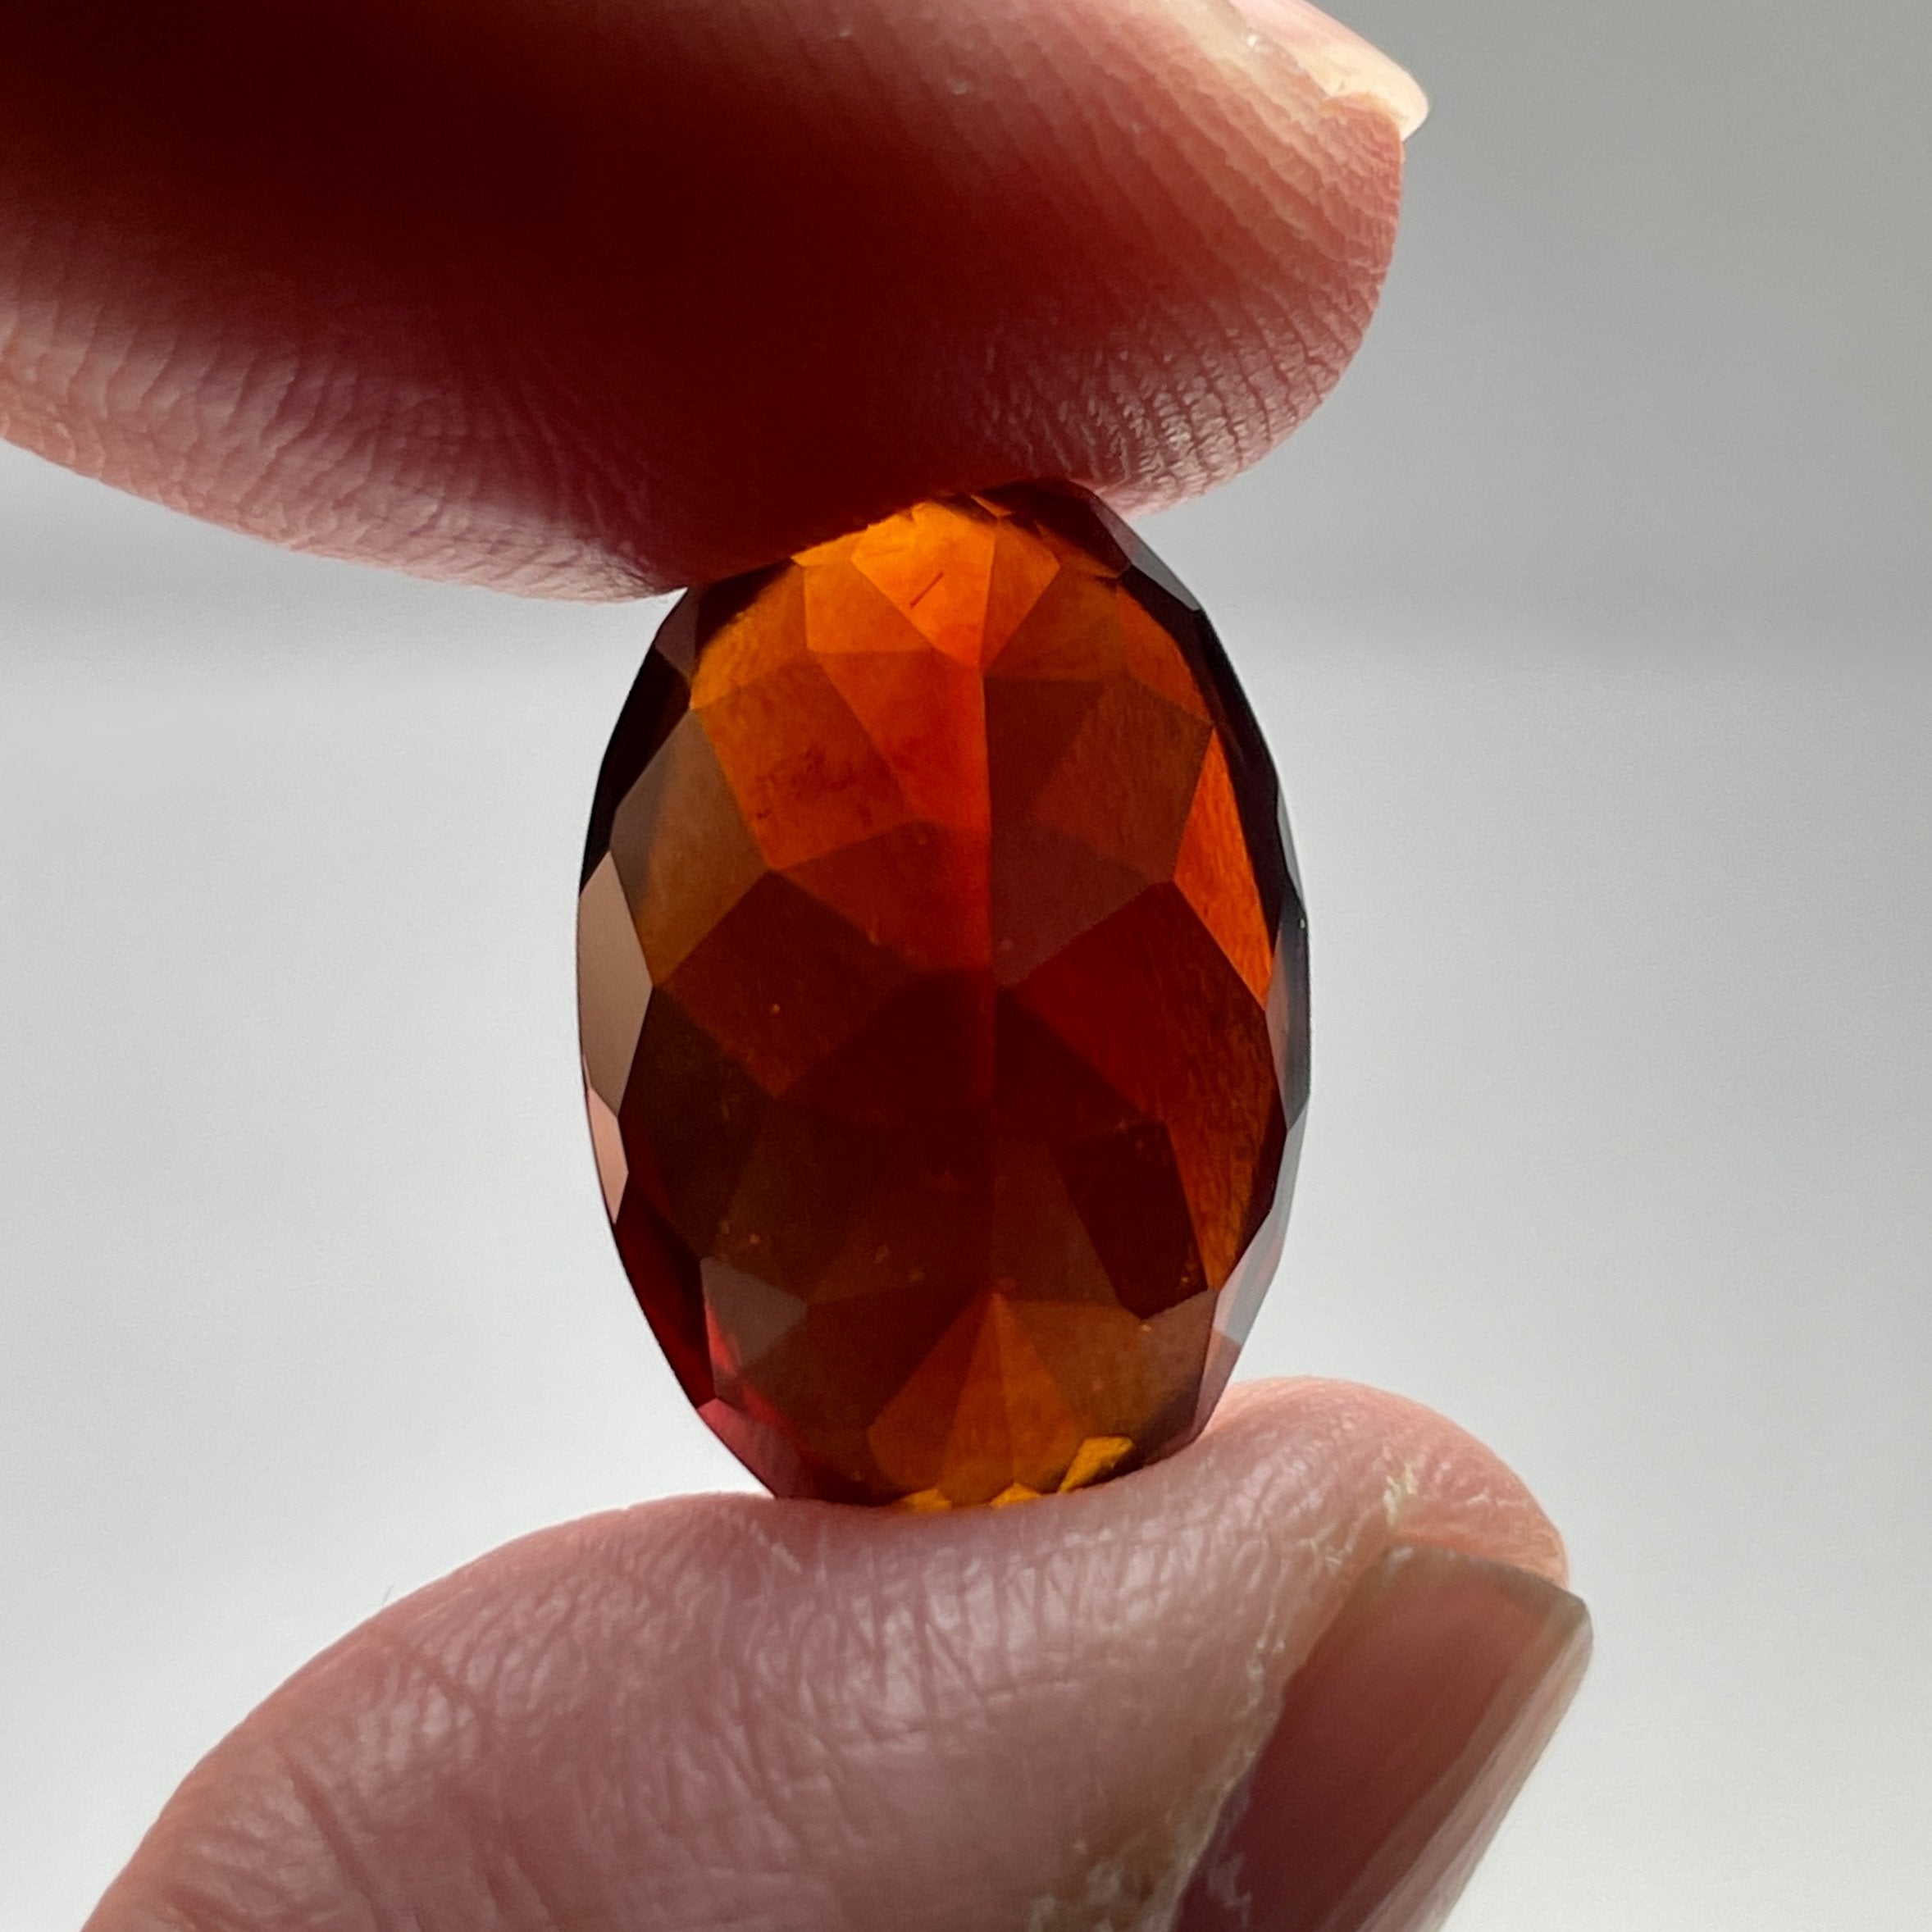 17.07Ct Hessonite Garnet Tanzania Untreated Unheated. 18 X 11.8 8.9 Mm. Use Either Side.